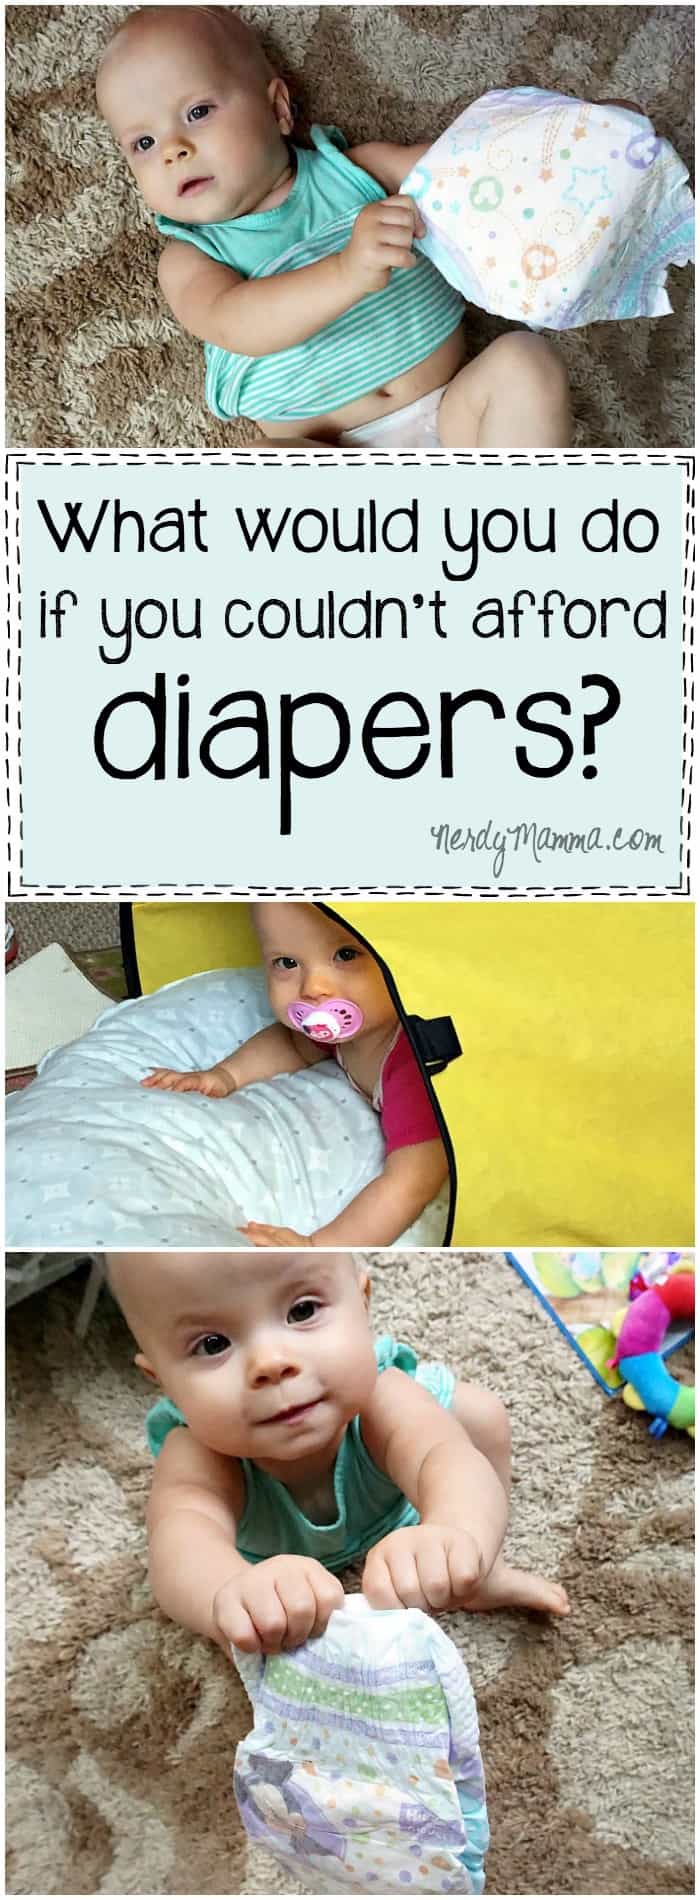 This is such a great idea for giving back--doing a diaper drive. Or even just contributing to a diaper bank. I love this.